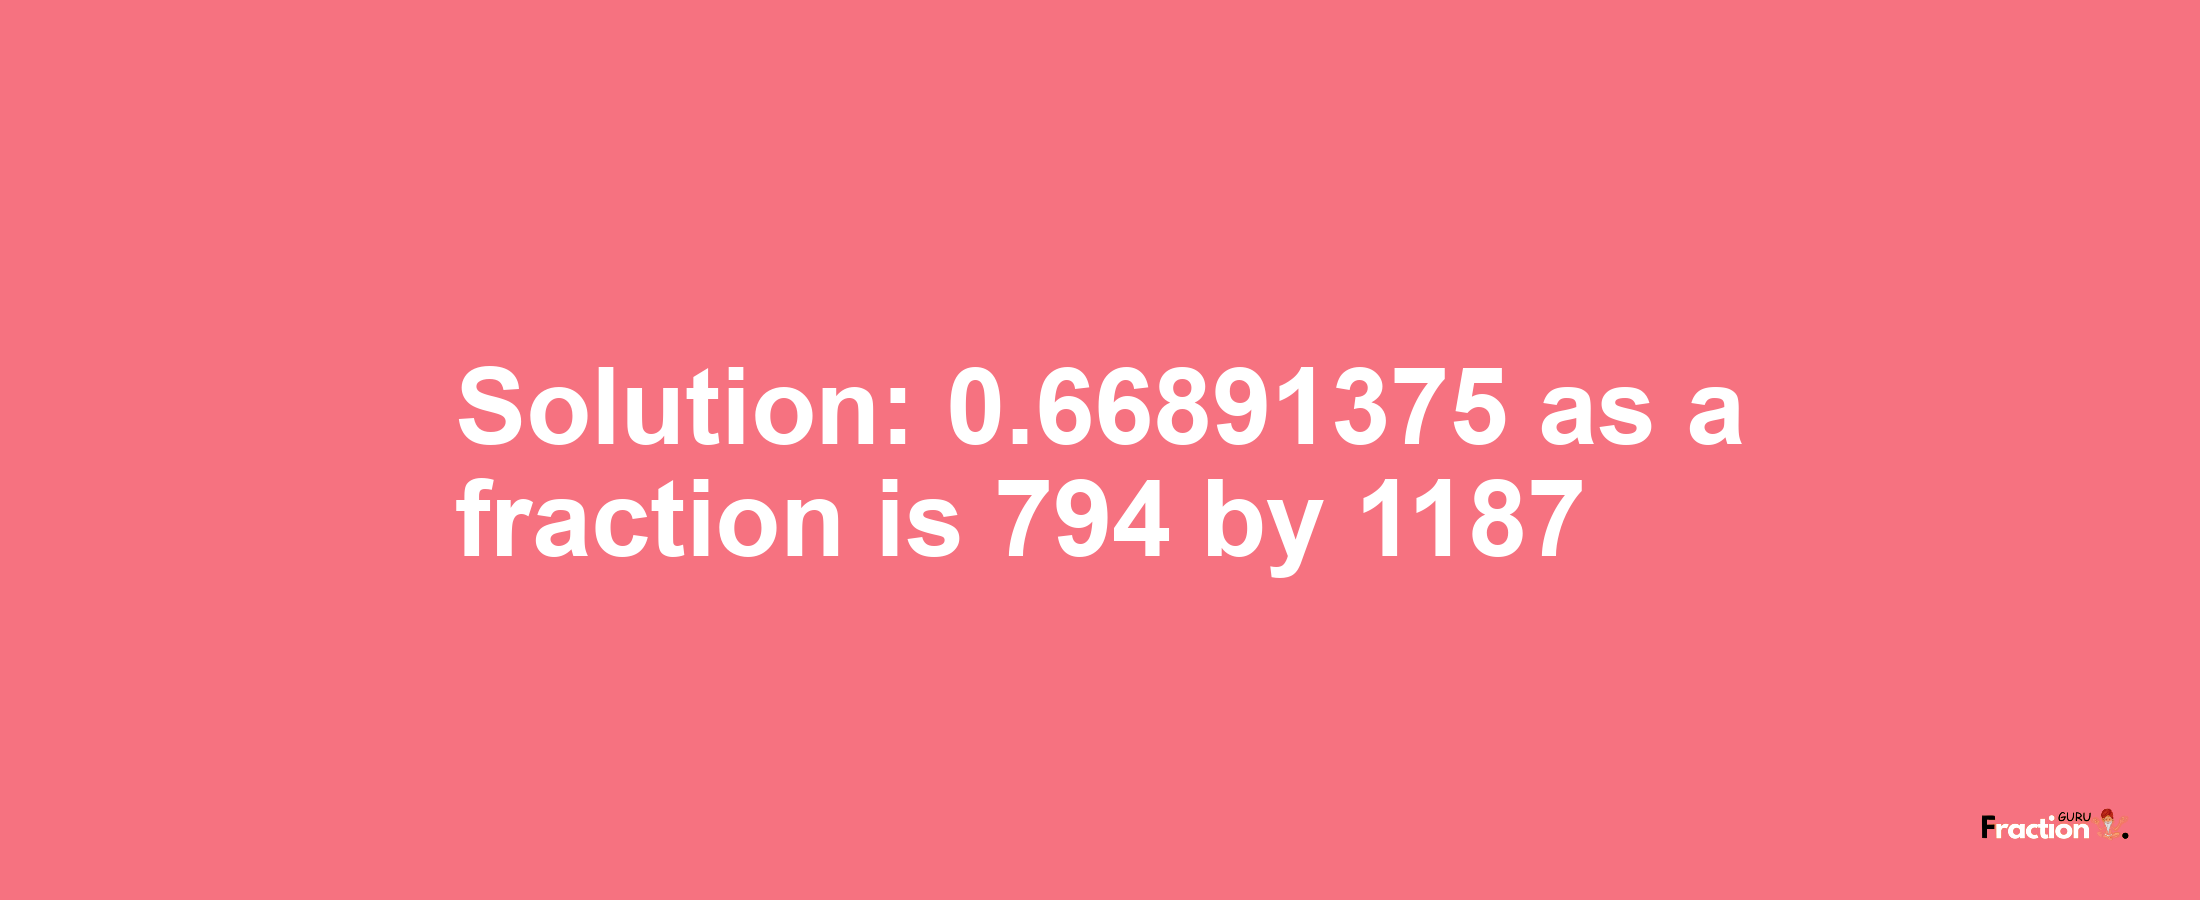 Solution:0.66891375 as a fraction is 794/1187